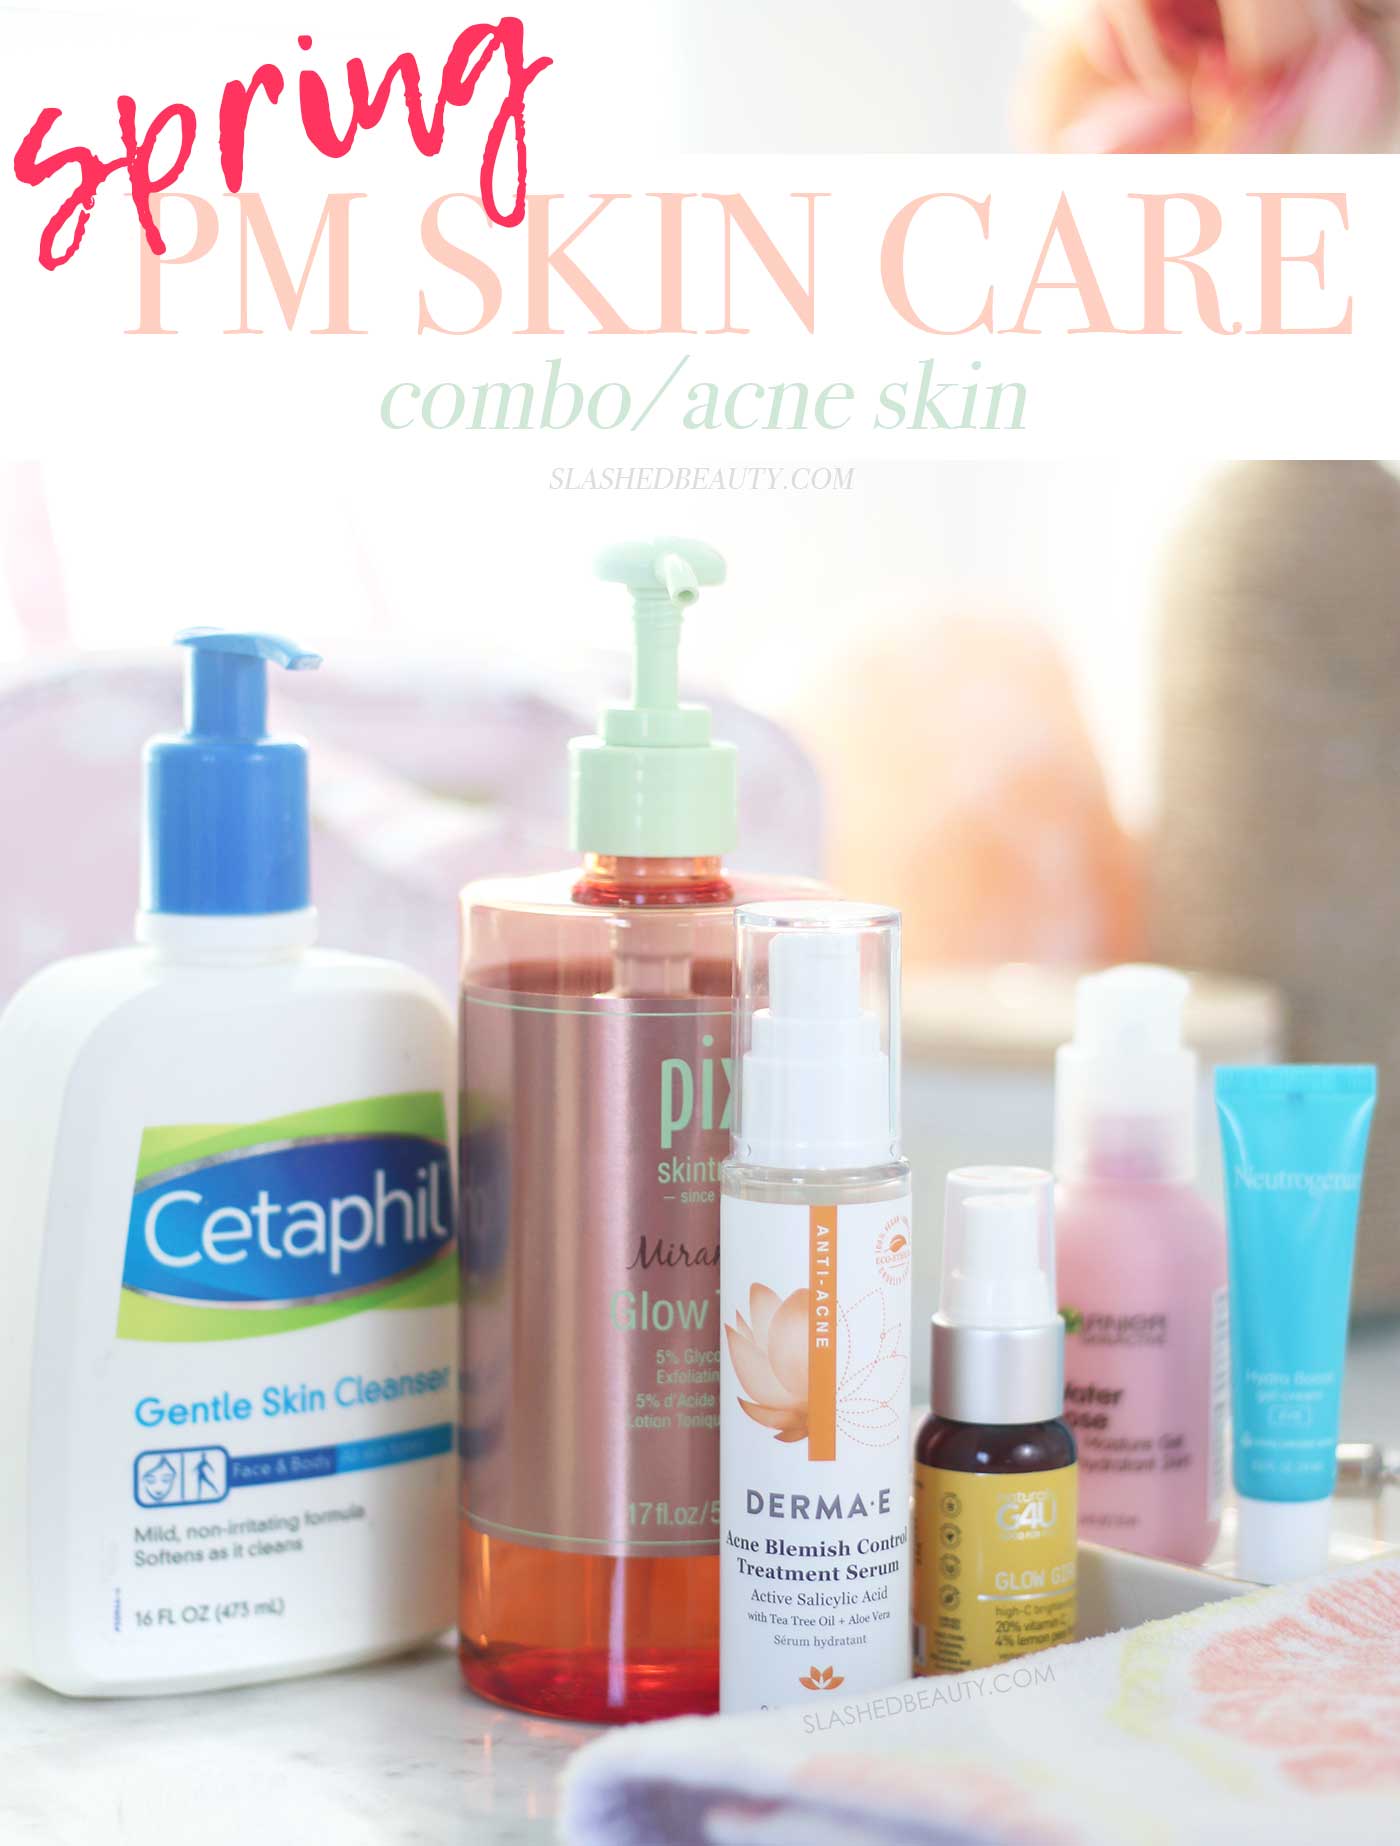 Skin Care - How You Can Look After Your Skin